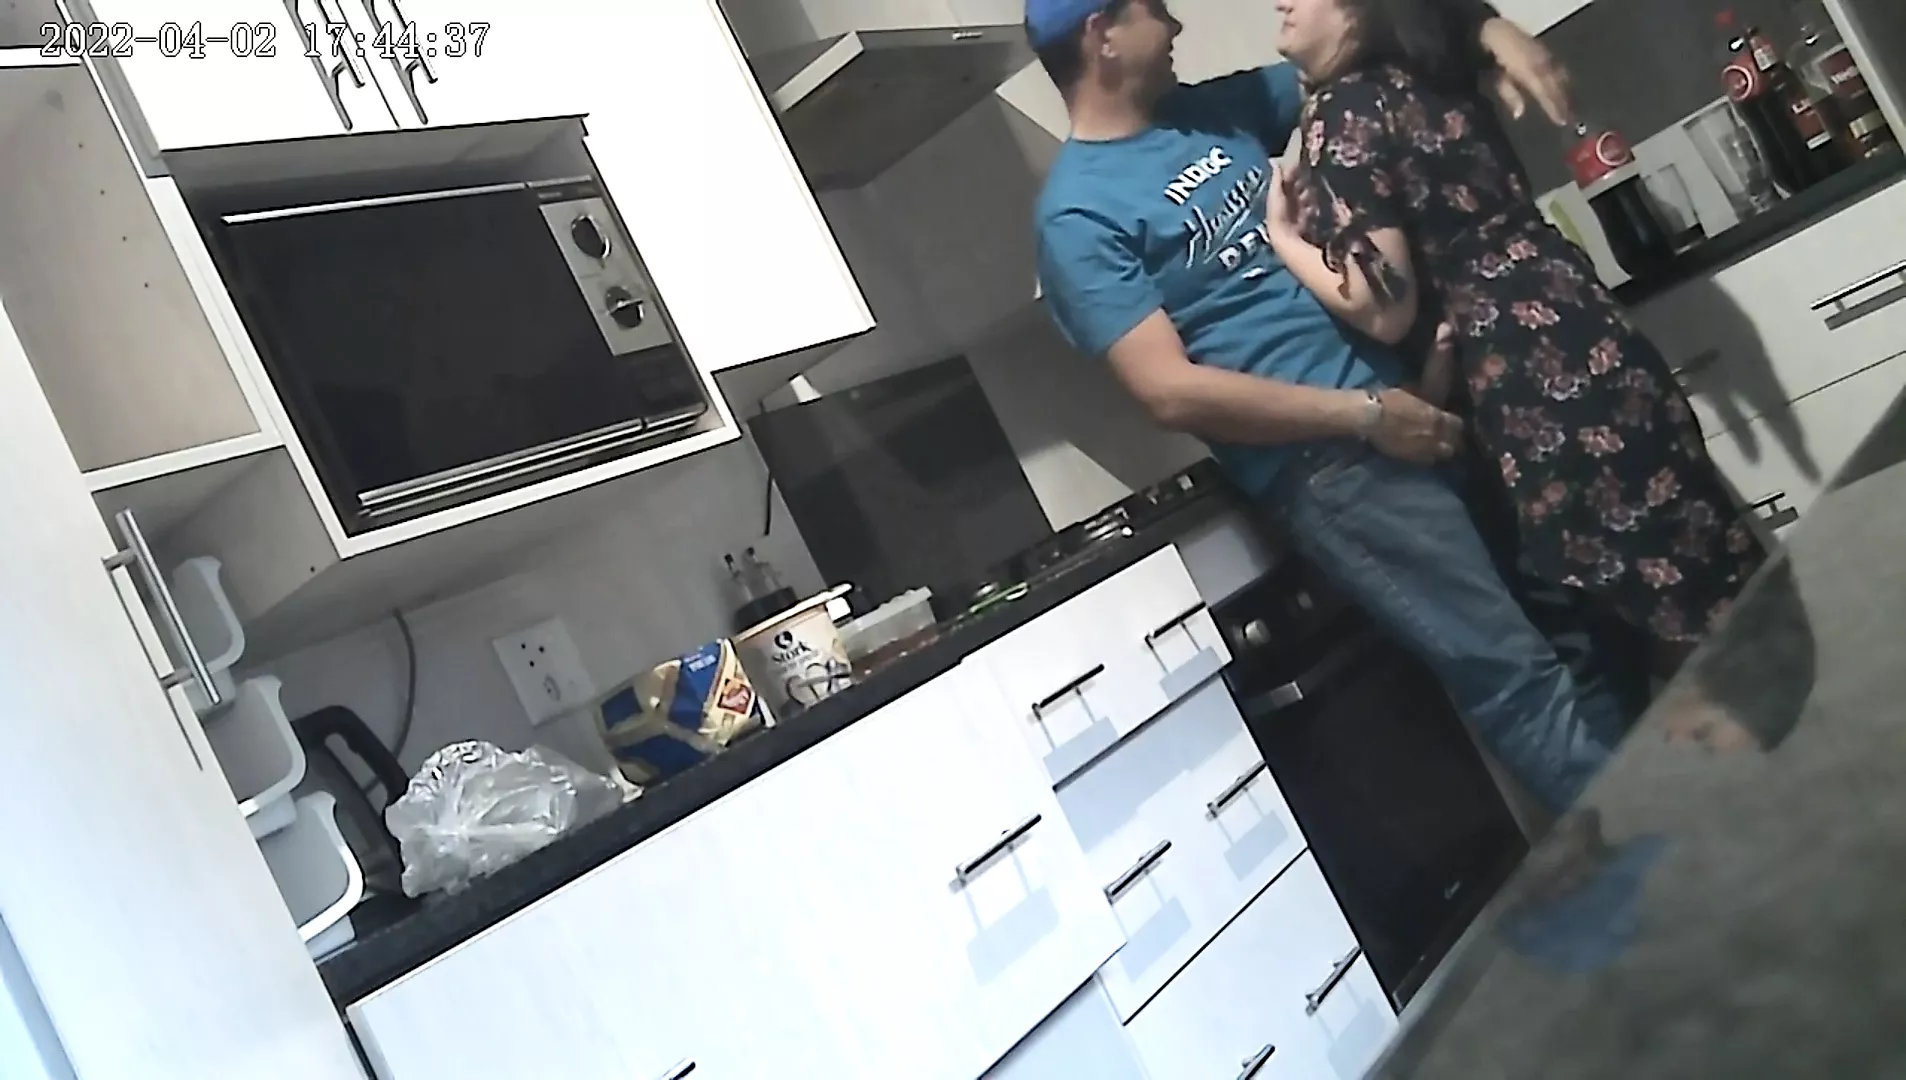 Spy Cam Caught My Pregnant Wife Cheating with 18 Year Old Poolguy image